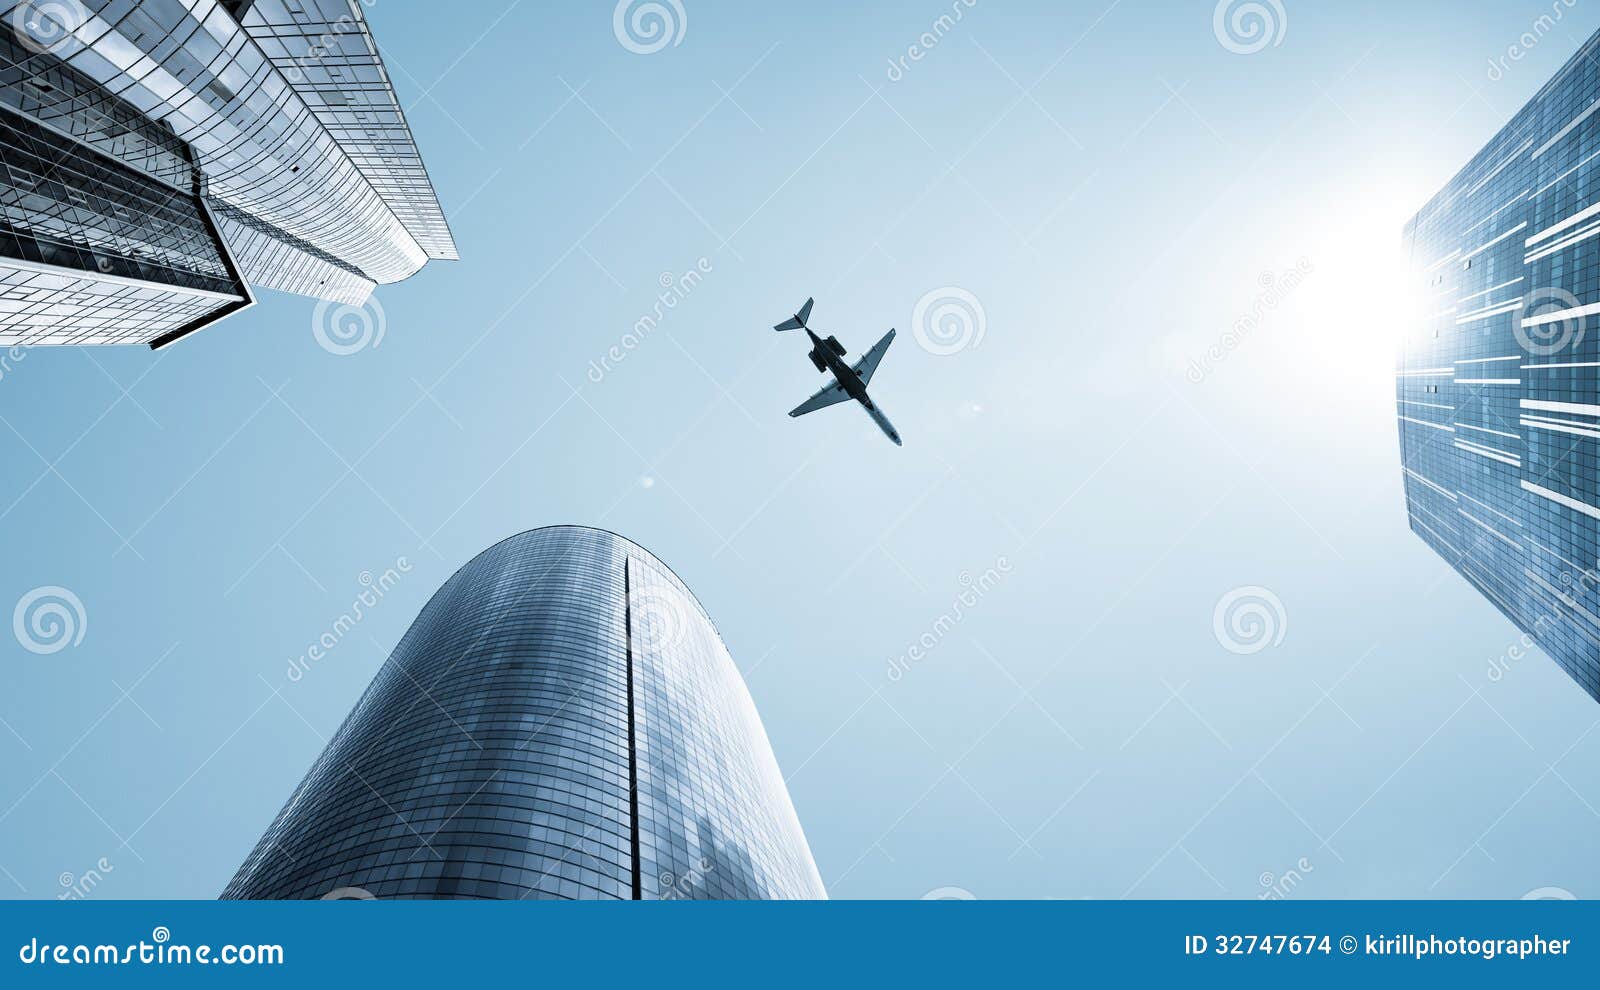 aircraft flying over skyscrapers